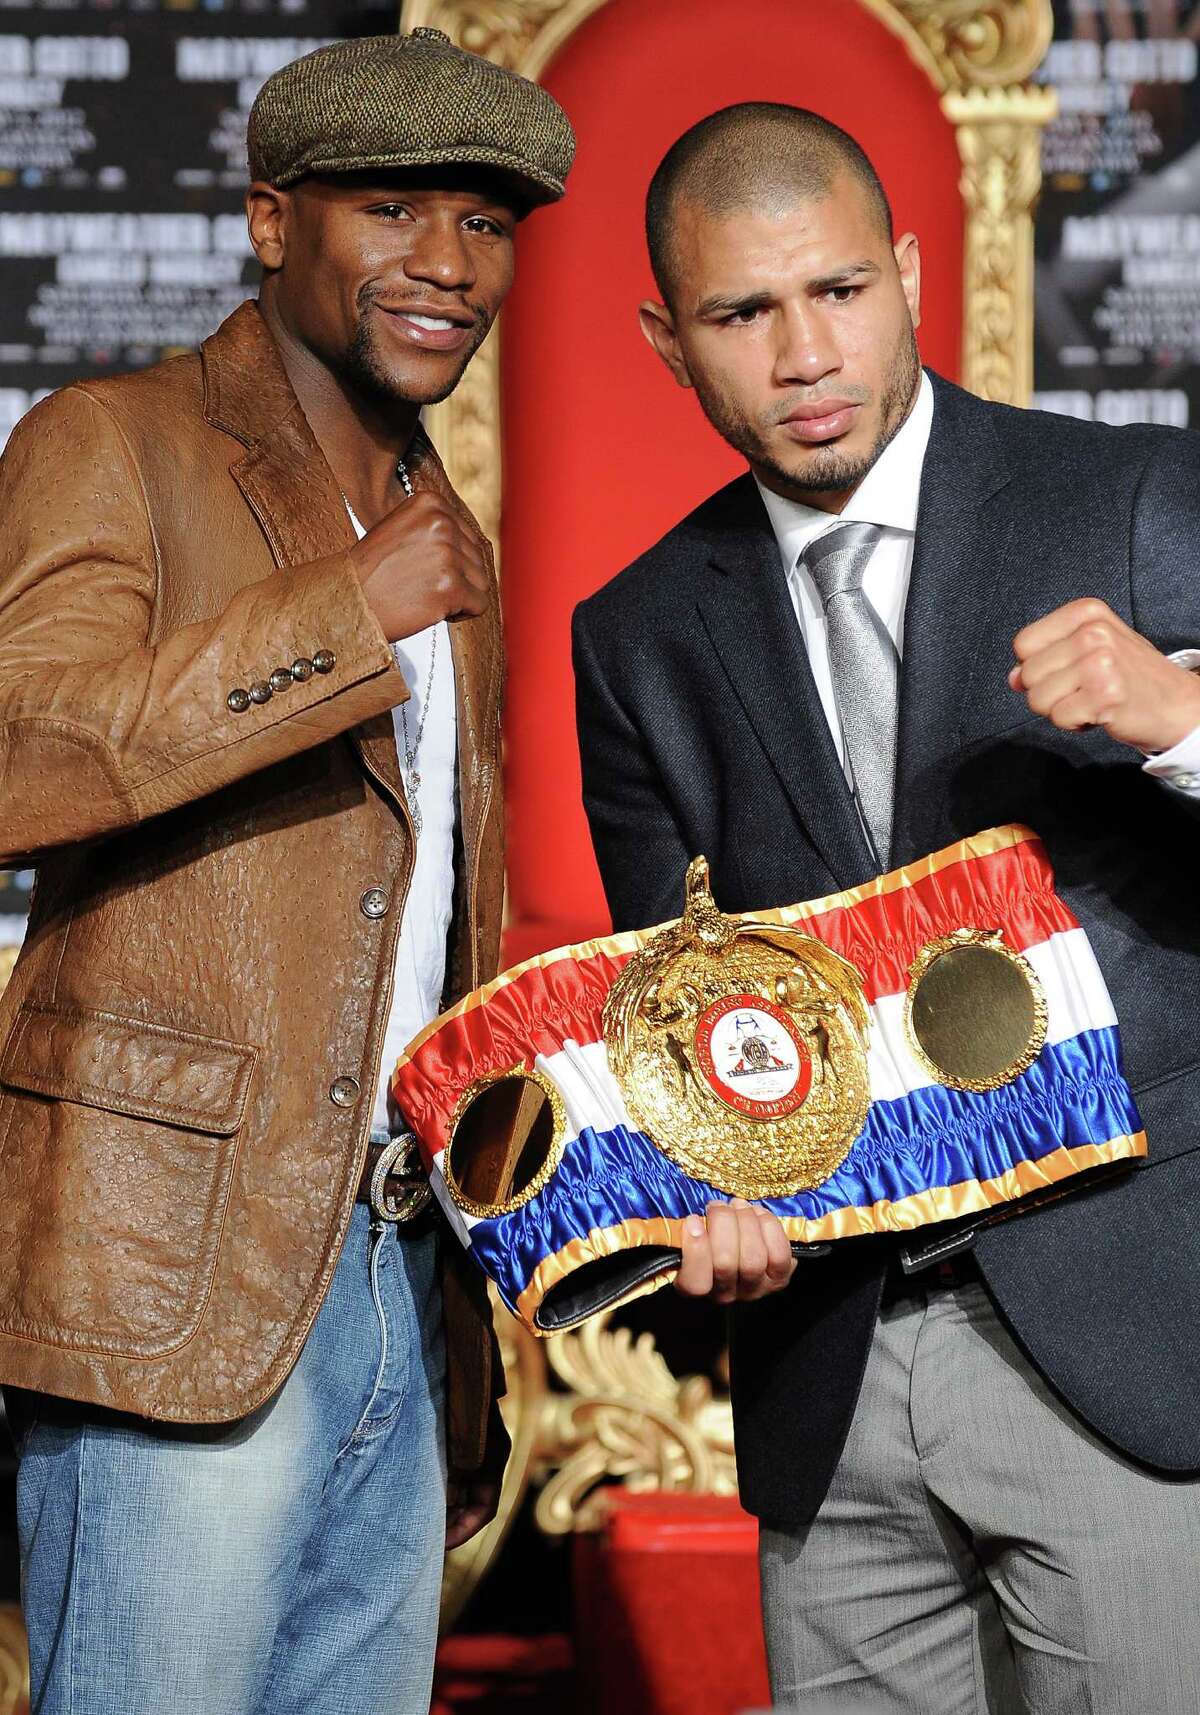 Floyd Mayweather (left) and Miguel Cotto will square off May 5 in Las Vegas.